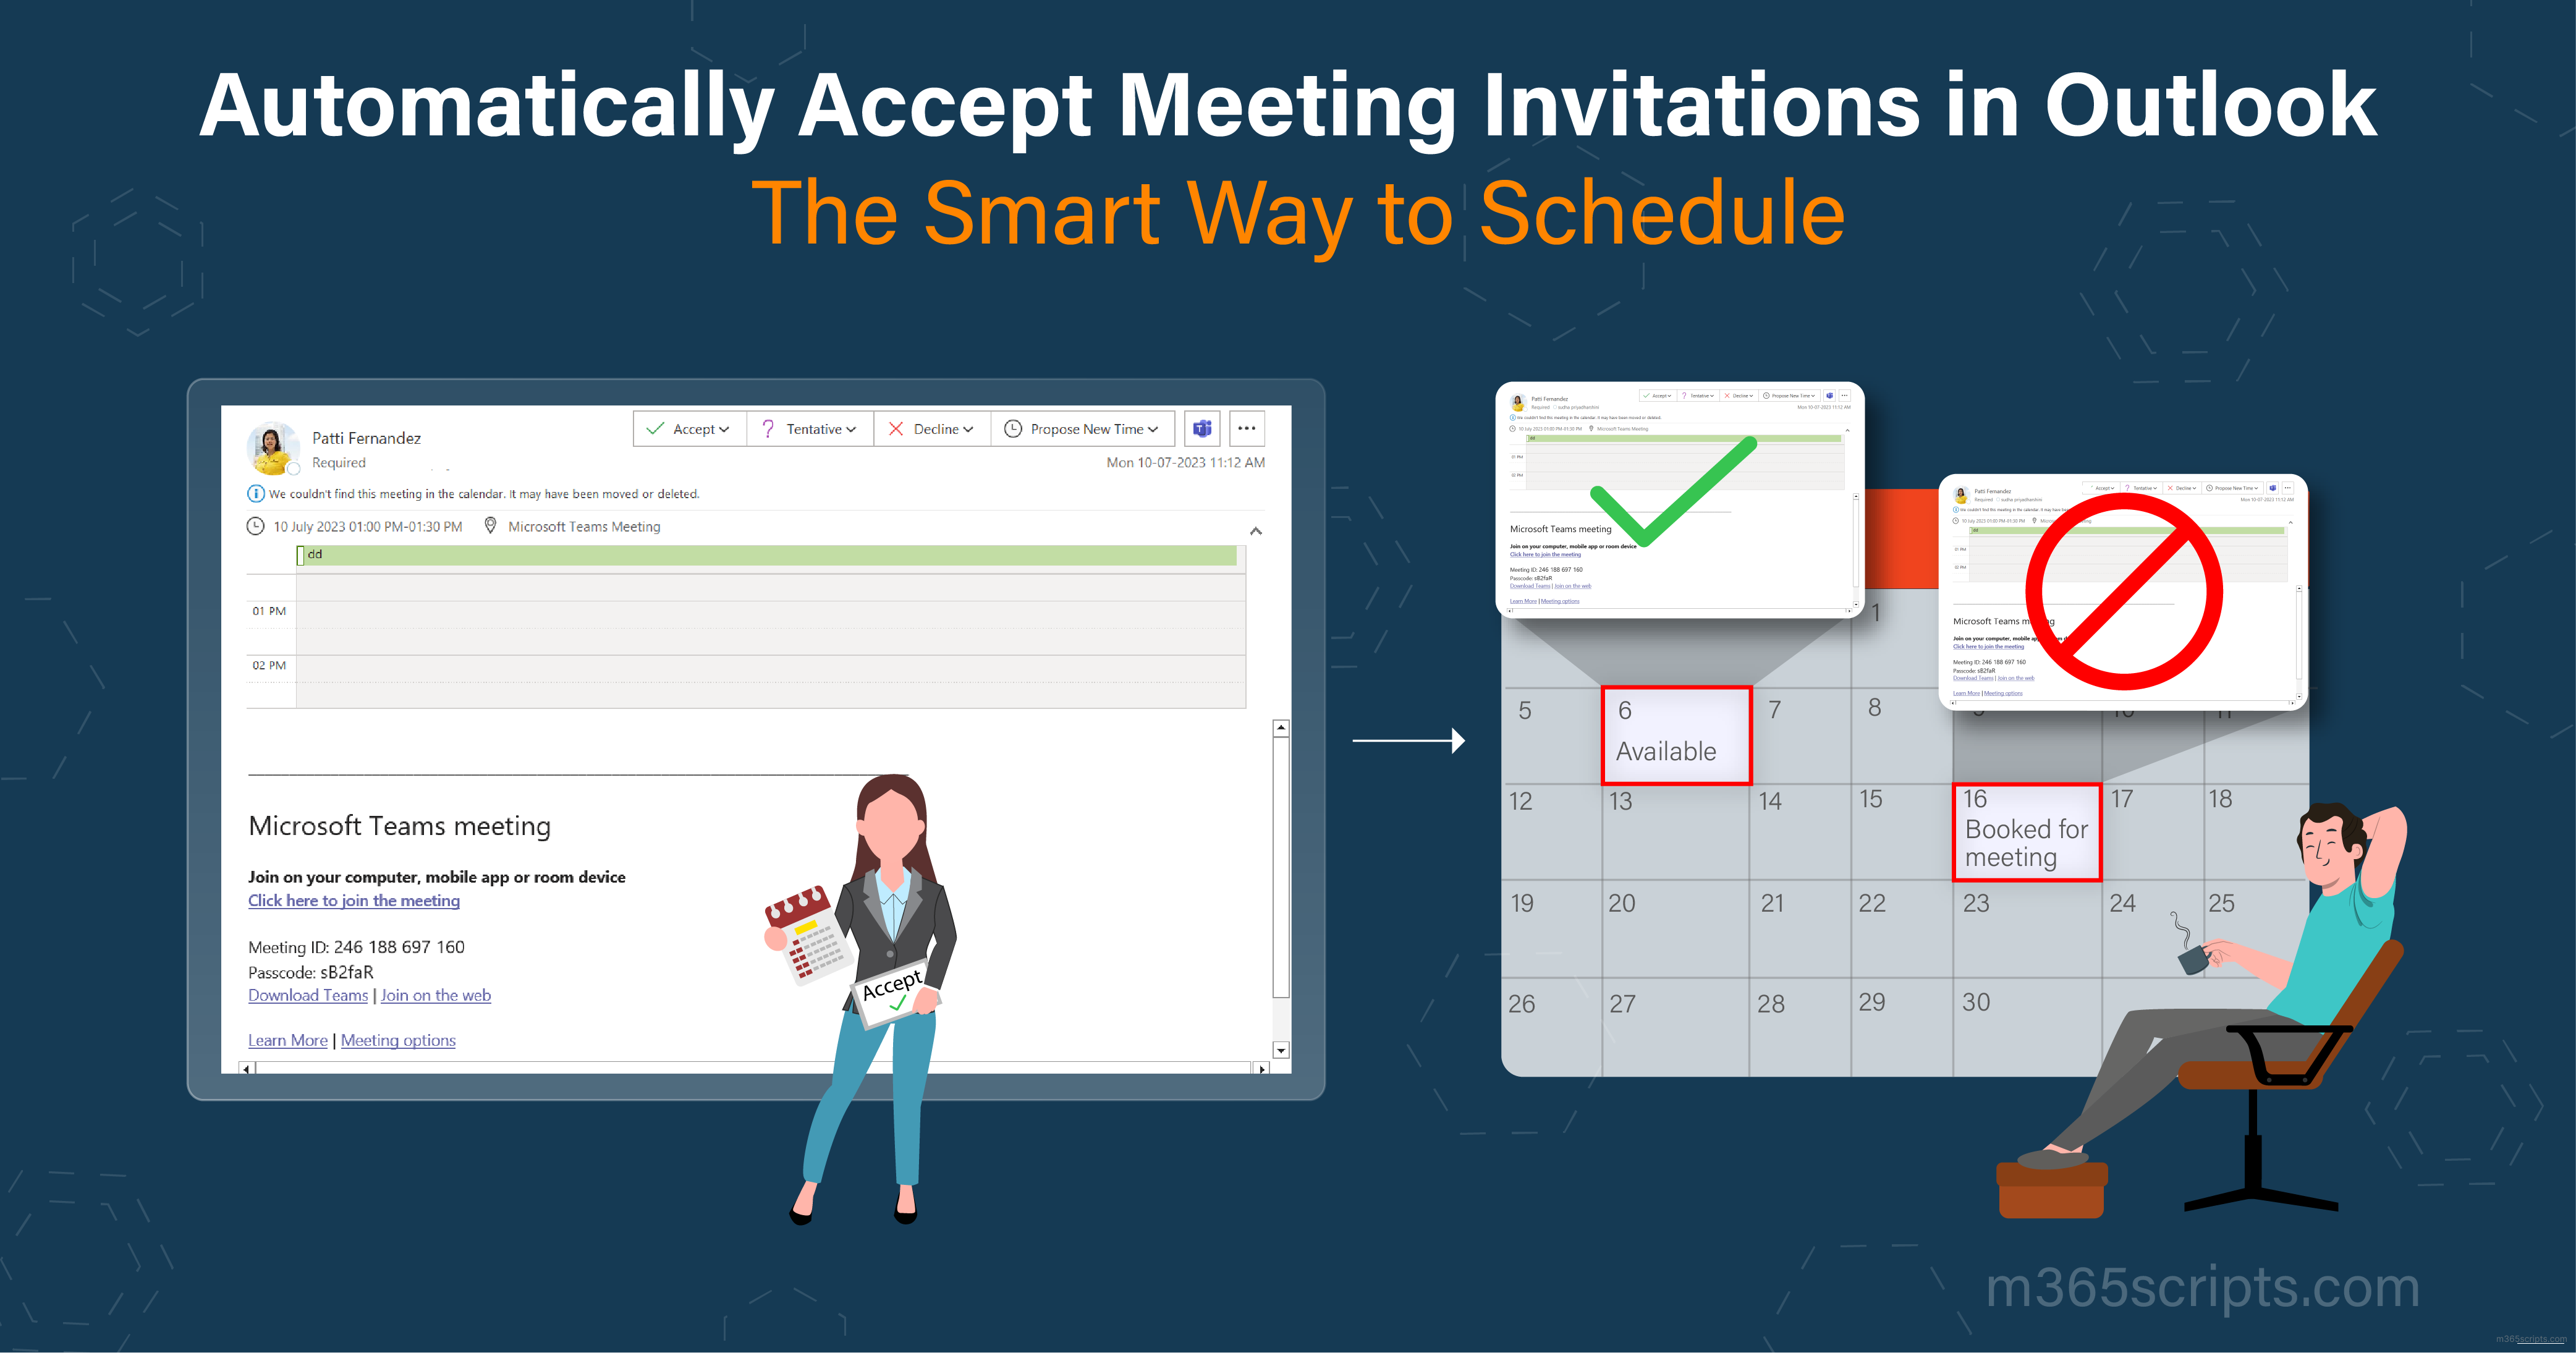 Auto Accept Meeting Invitations in Outlook The Smart Way to Schedule